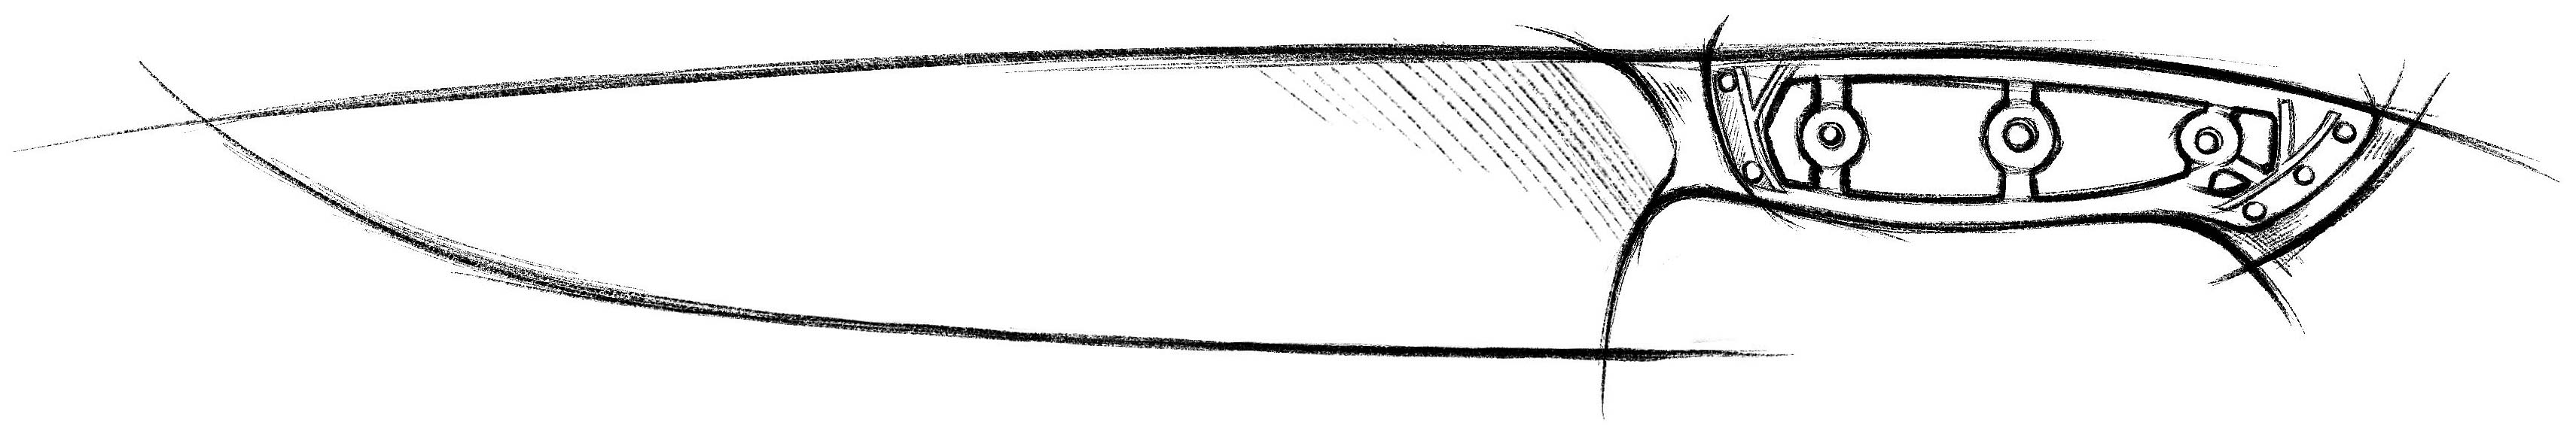 A sketch a kitchen knife in profile showing the internal structure of the handle.